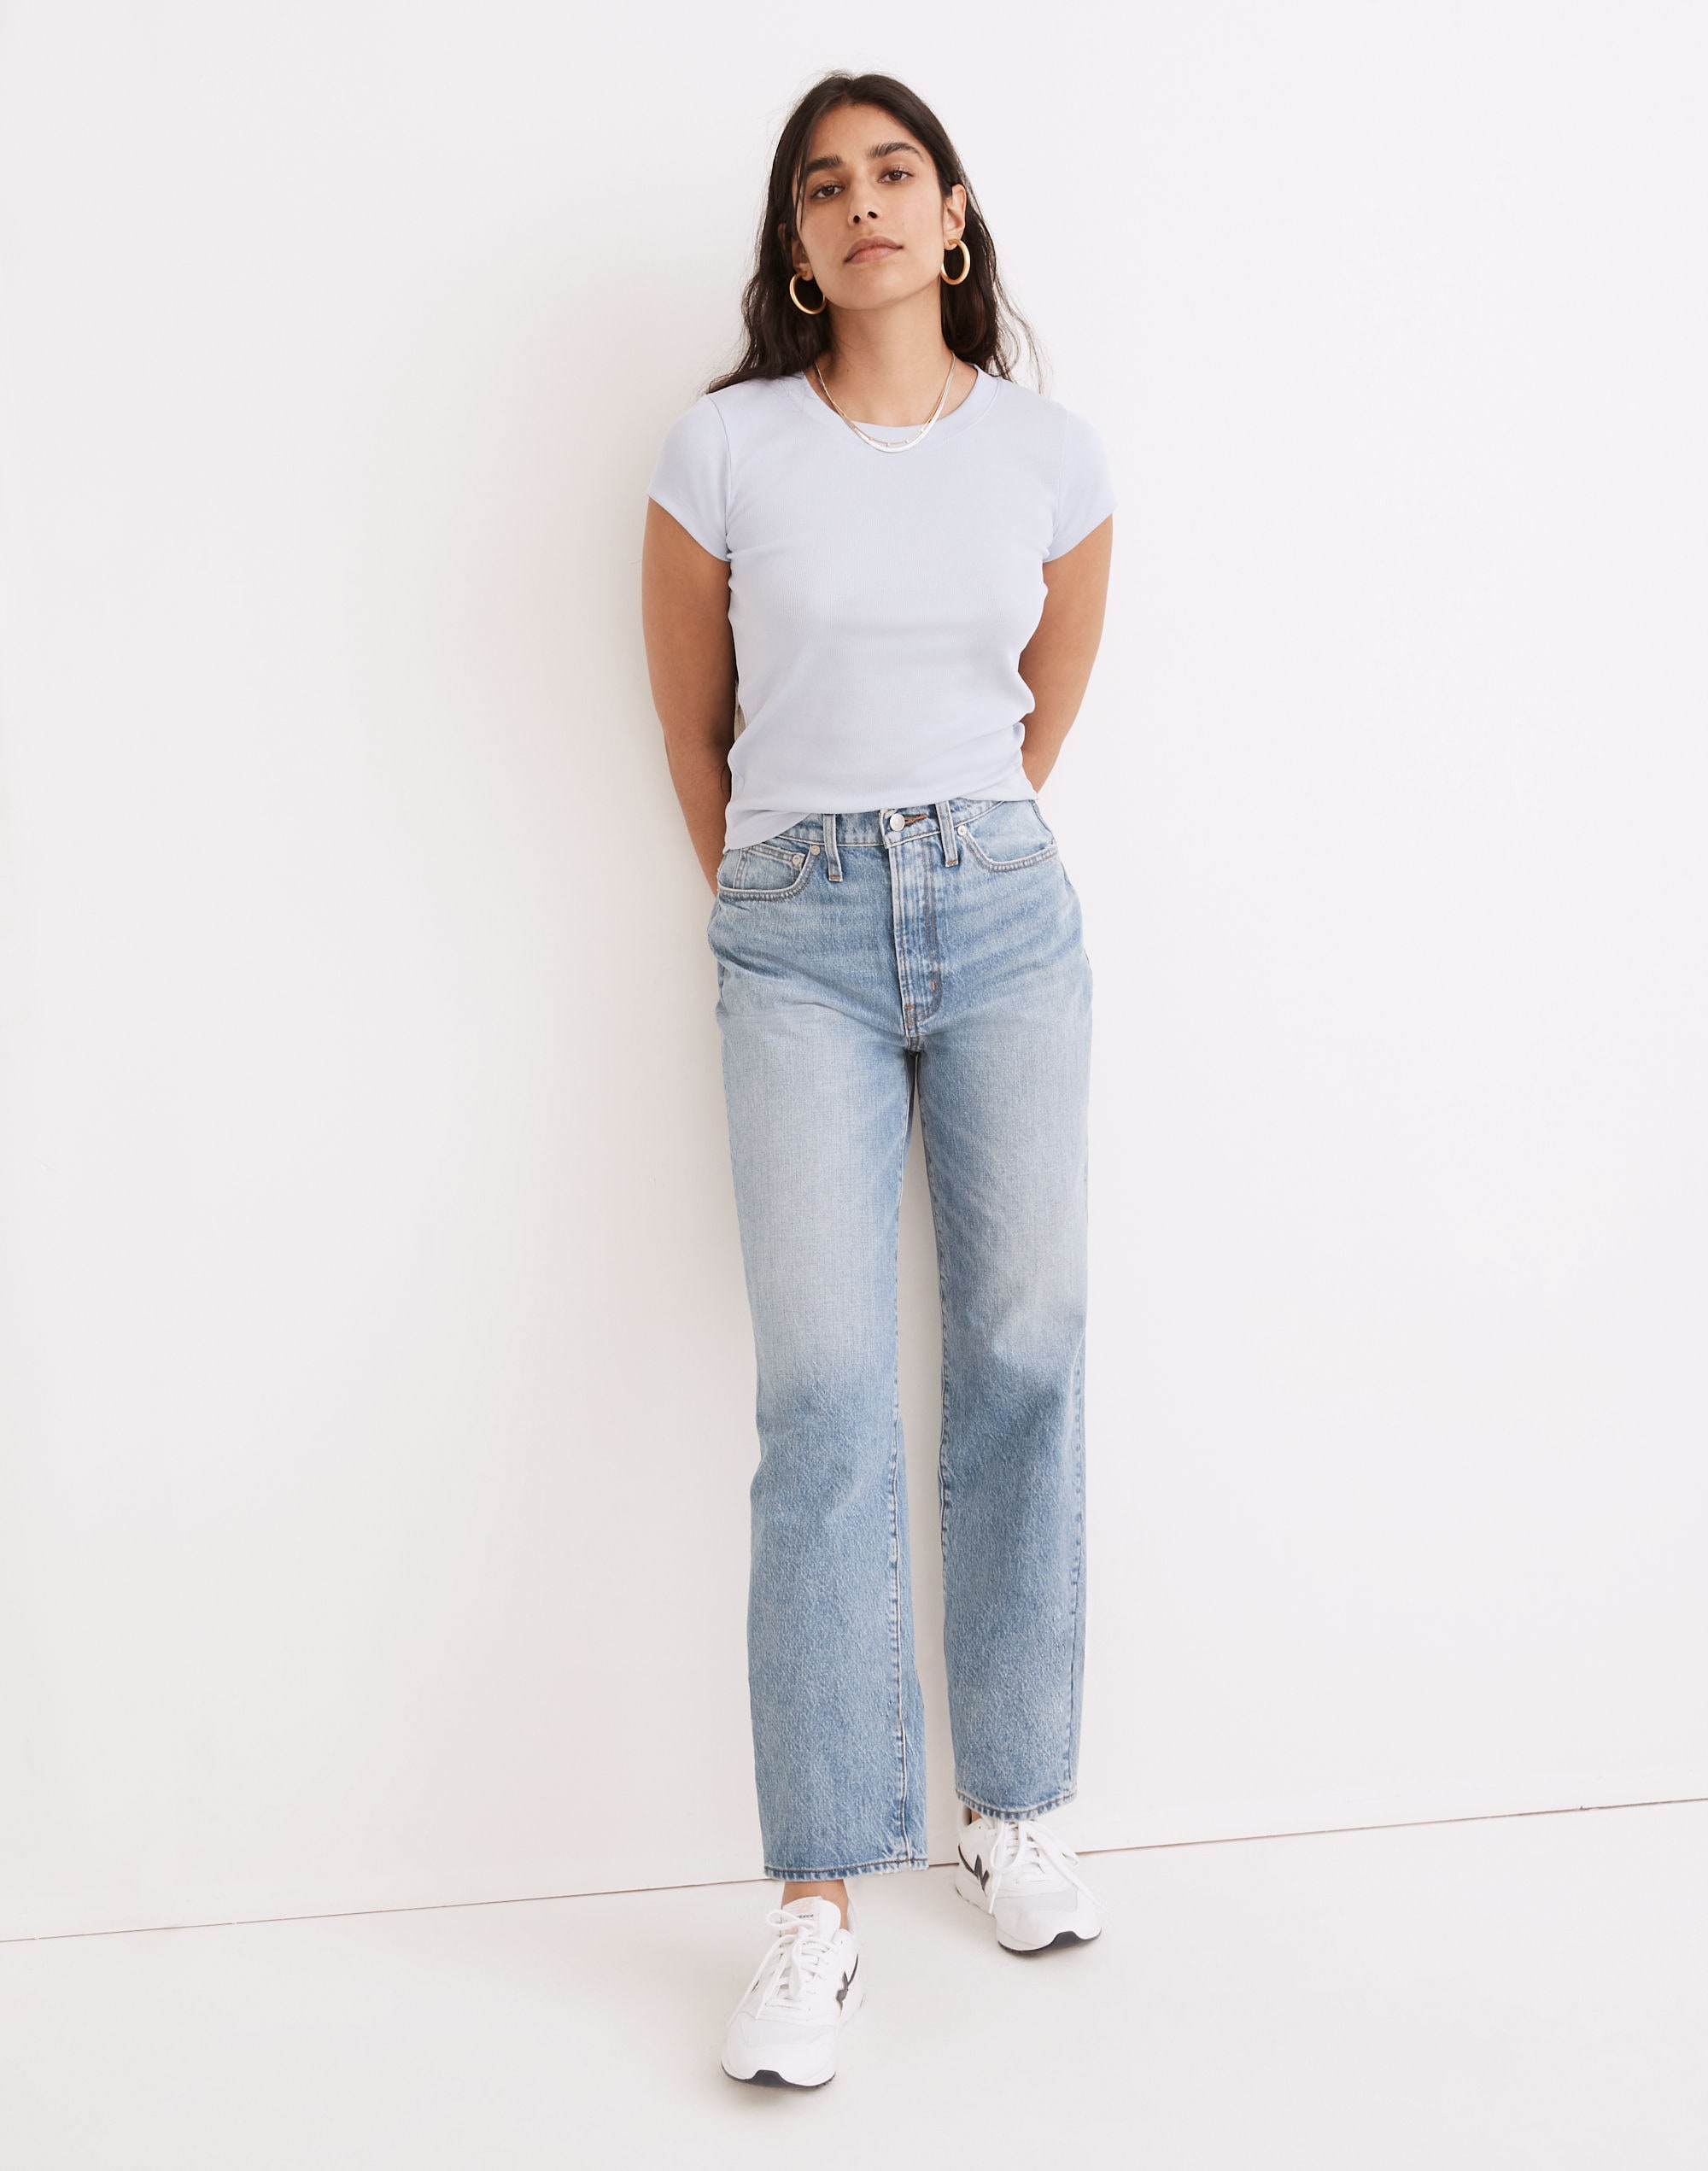 Madewell The Low Rise Perfect Vintage Straight Jeans in Bromton Wash - Size  33 - Jeans